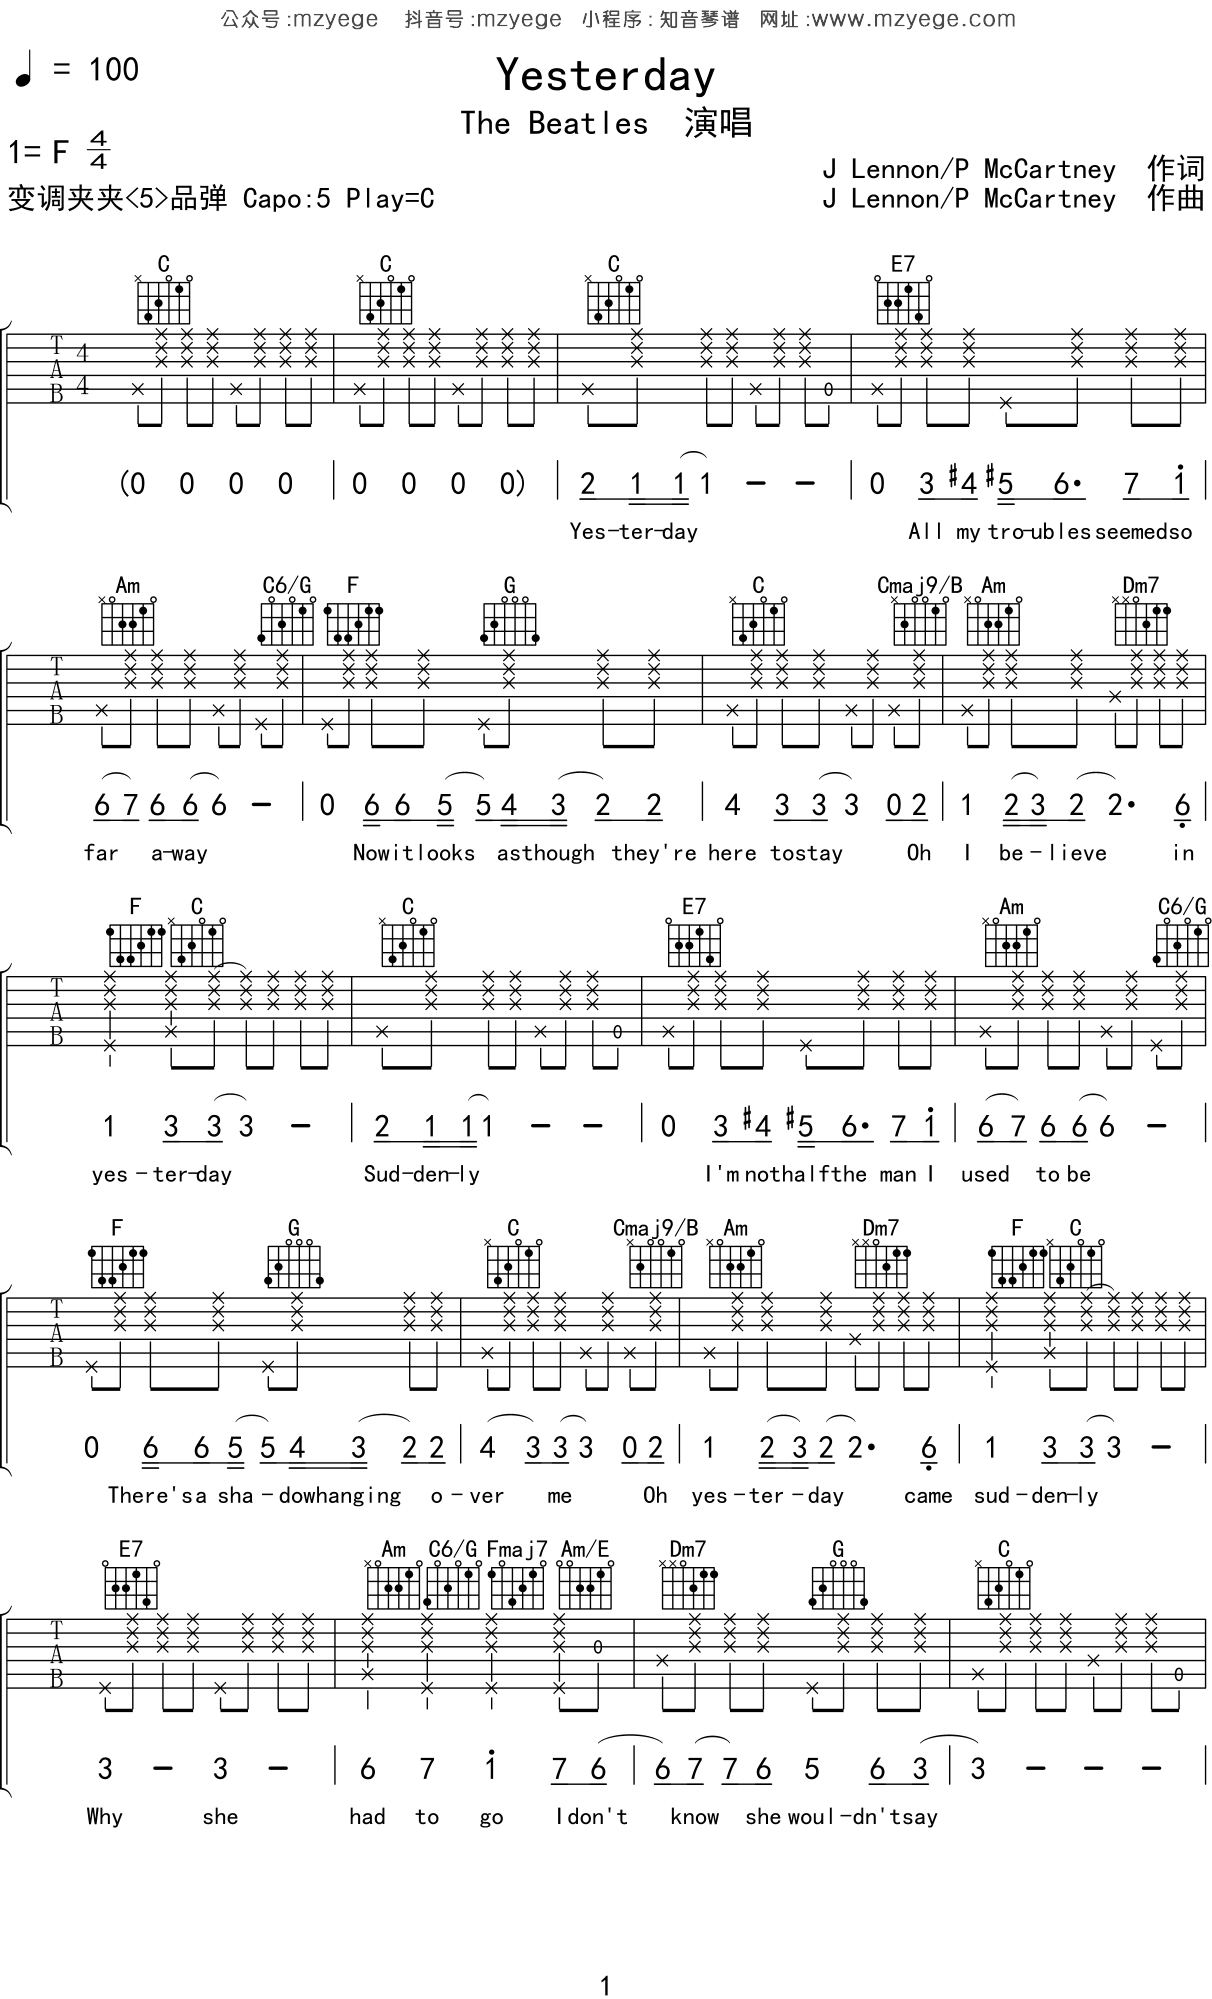 The Beatles "Yesterday" Sheet Music Notes | Download Printable PDF ...